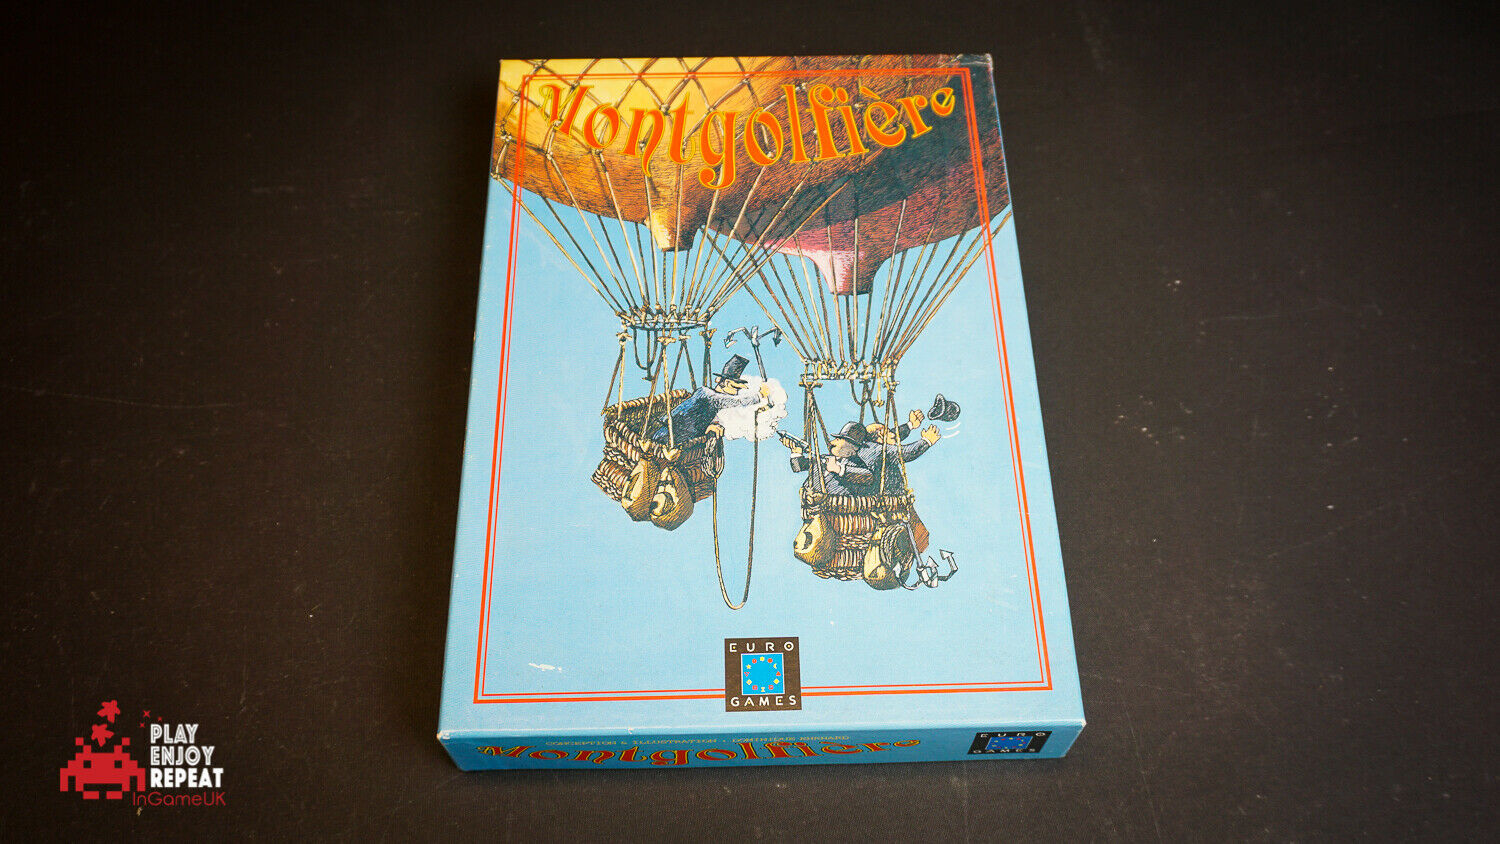 MONTGOLFIERE EURO GAMES VINTAGE BOARD GAME COMPLETE FAST AND FREE UK POSTAGE